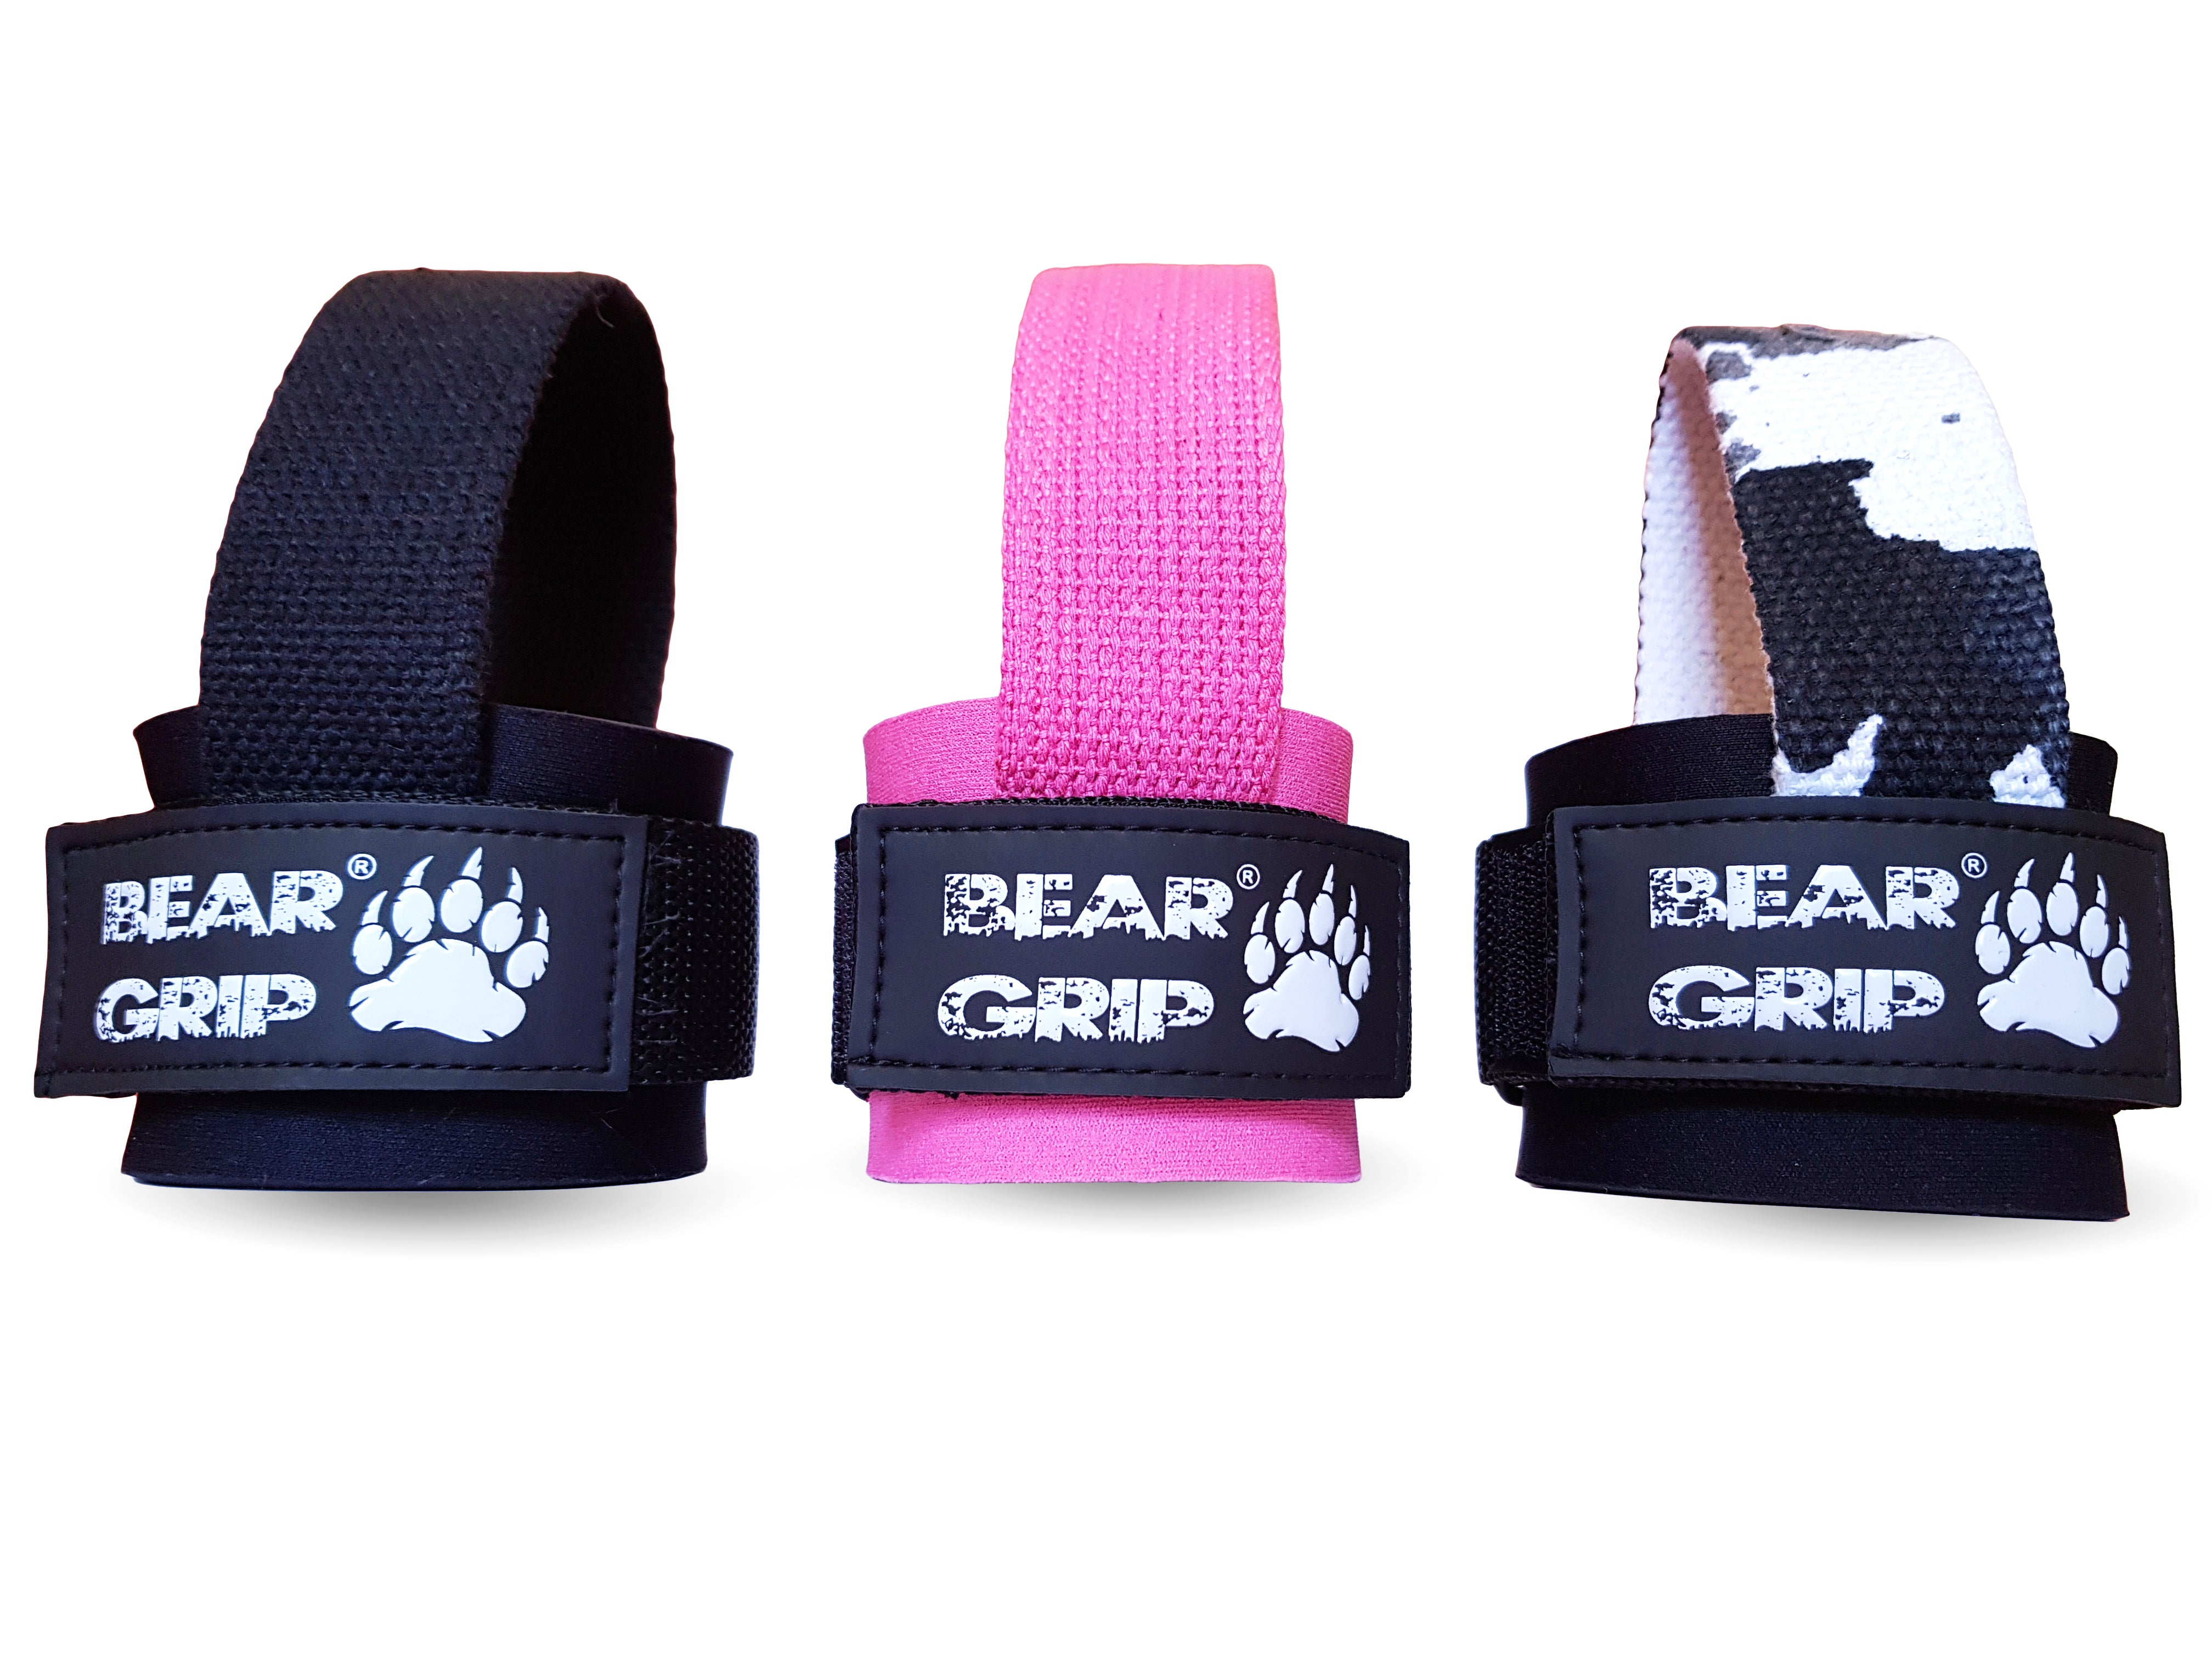 BEAR GRIP Power Straps - Weight lifting Straps